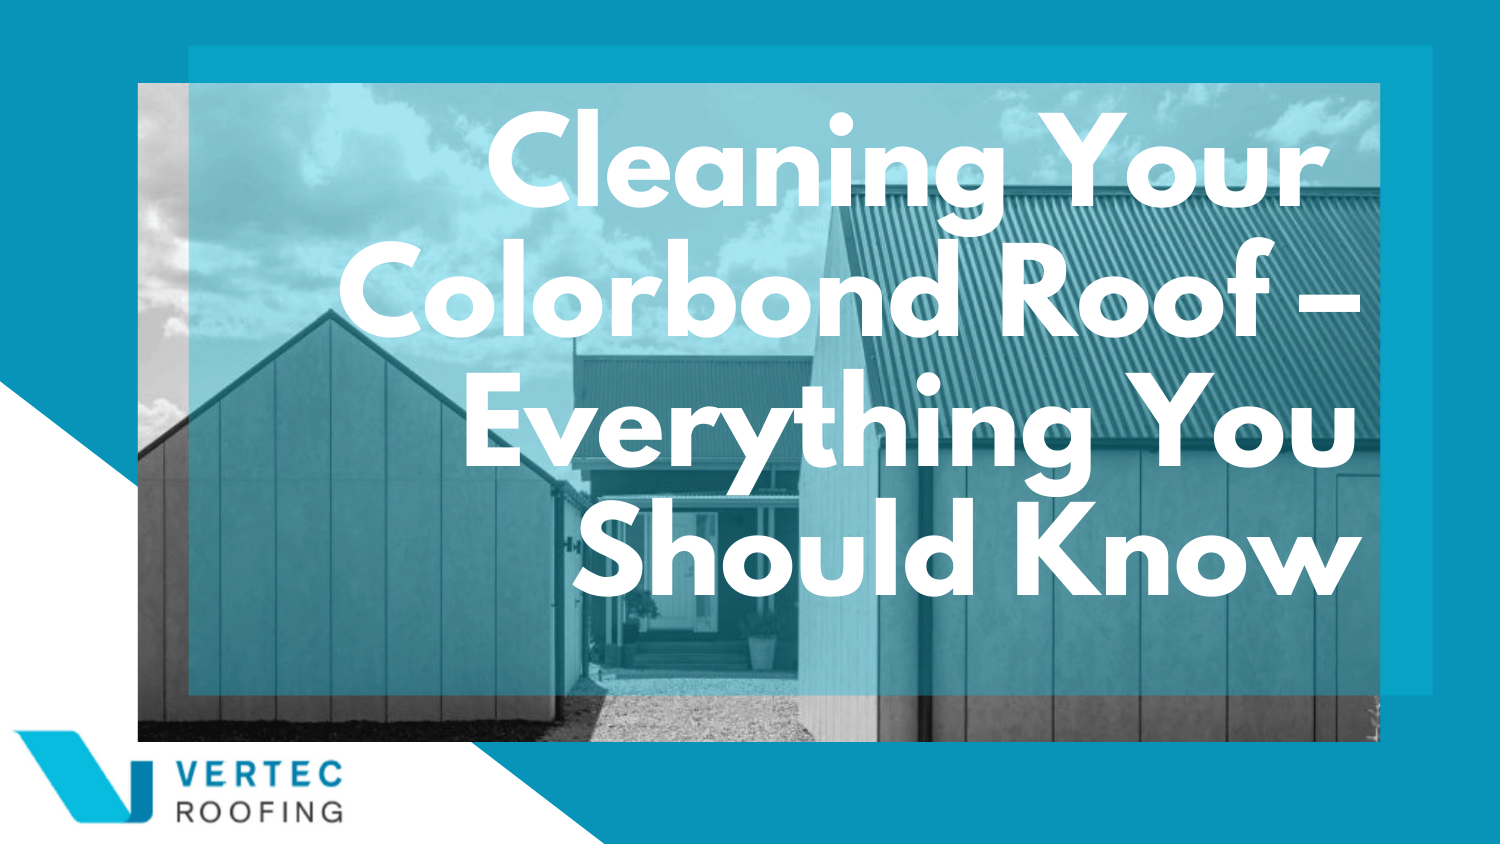 Cleaning Your Colorbond Roof – Everything You Should Know